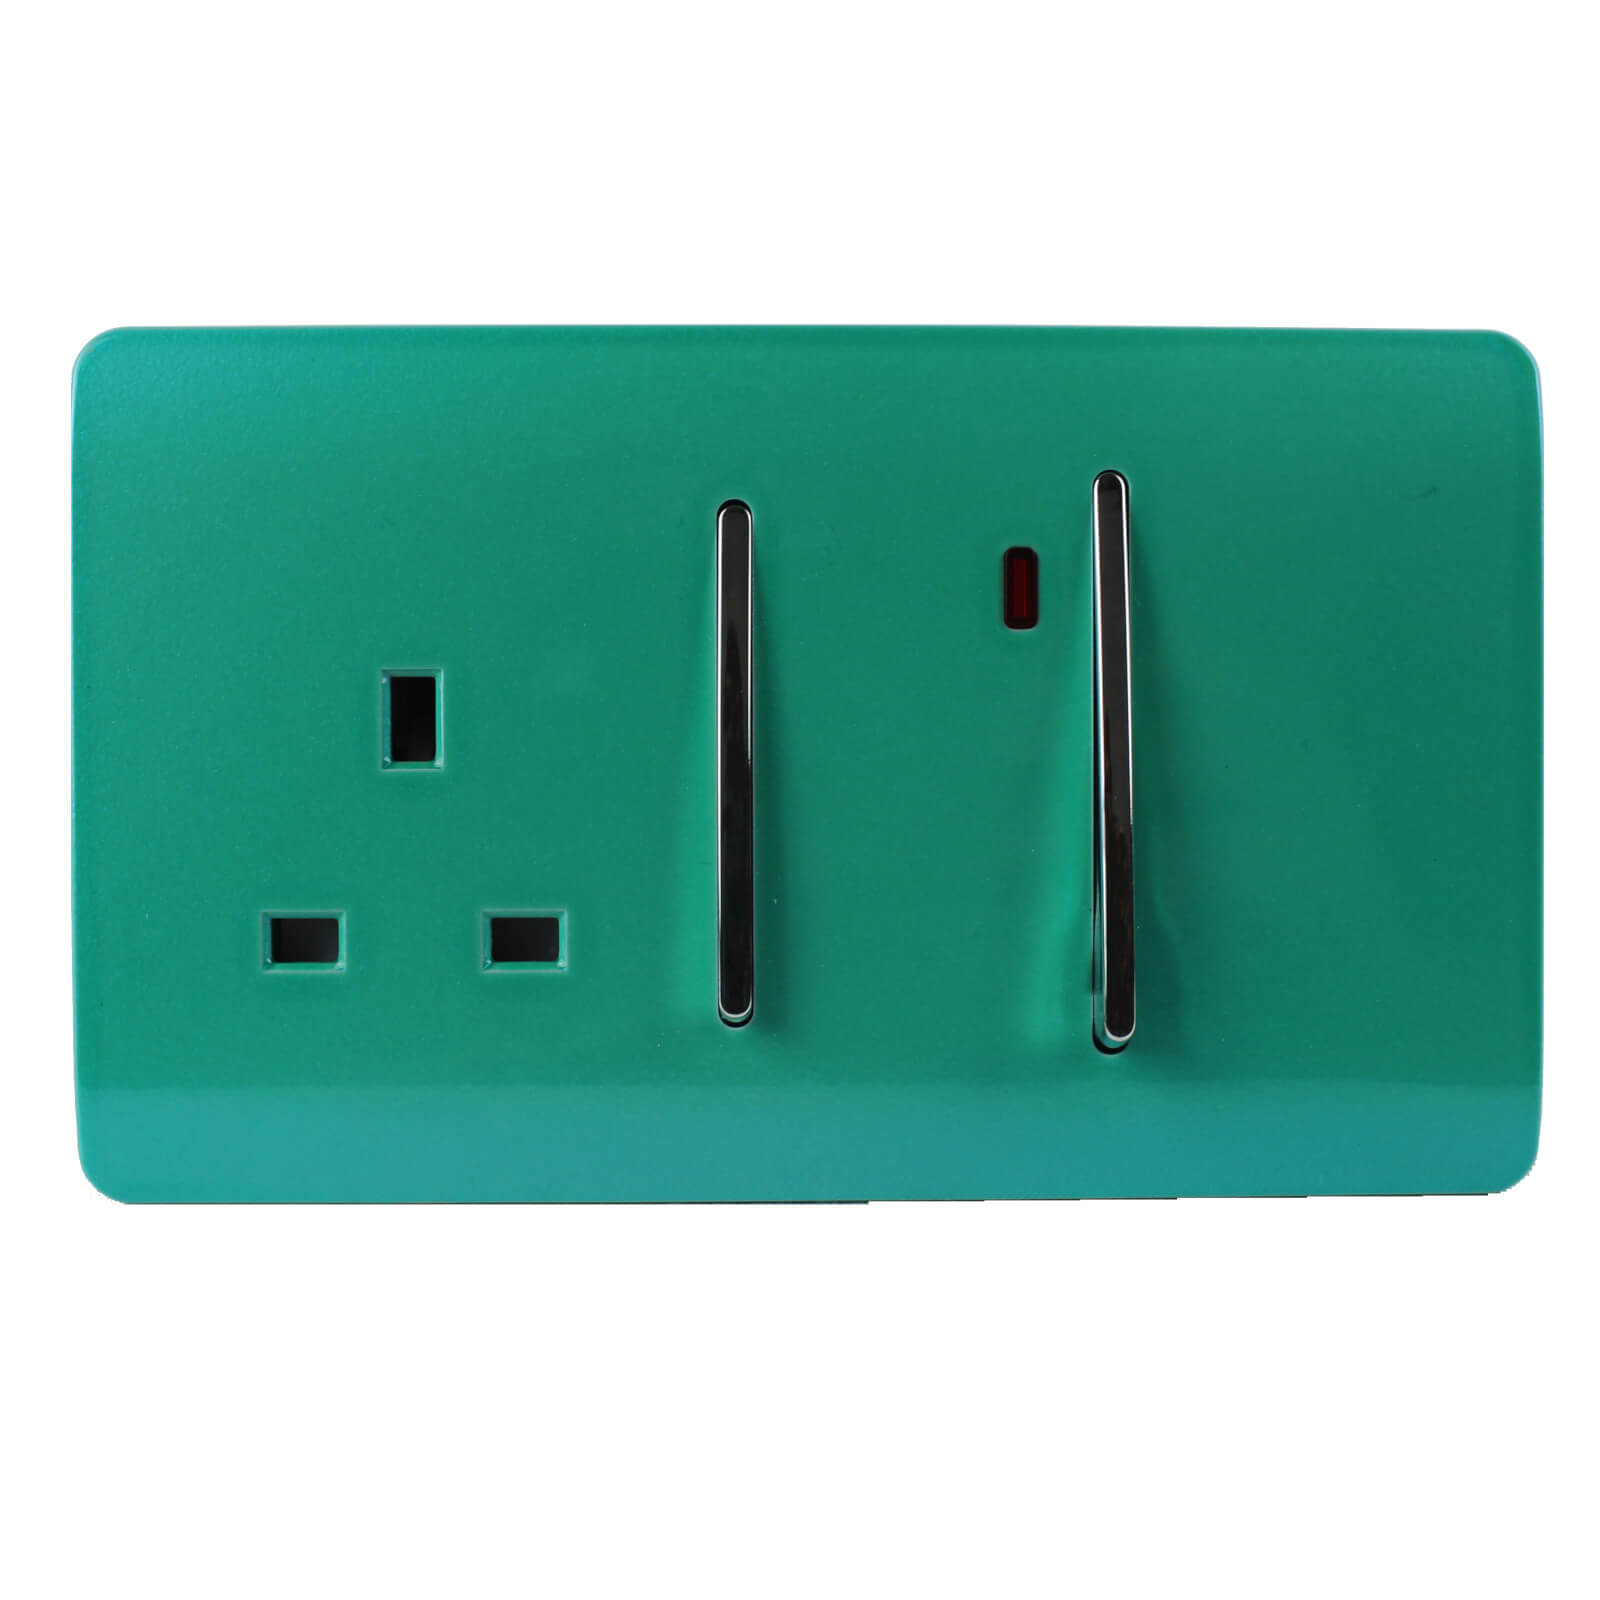 Trendi Switch 45A Neon Insert Cooker Switch in Screwless Teal